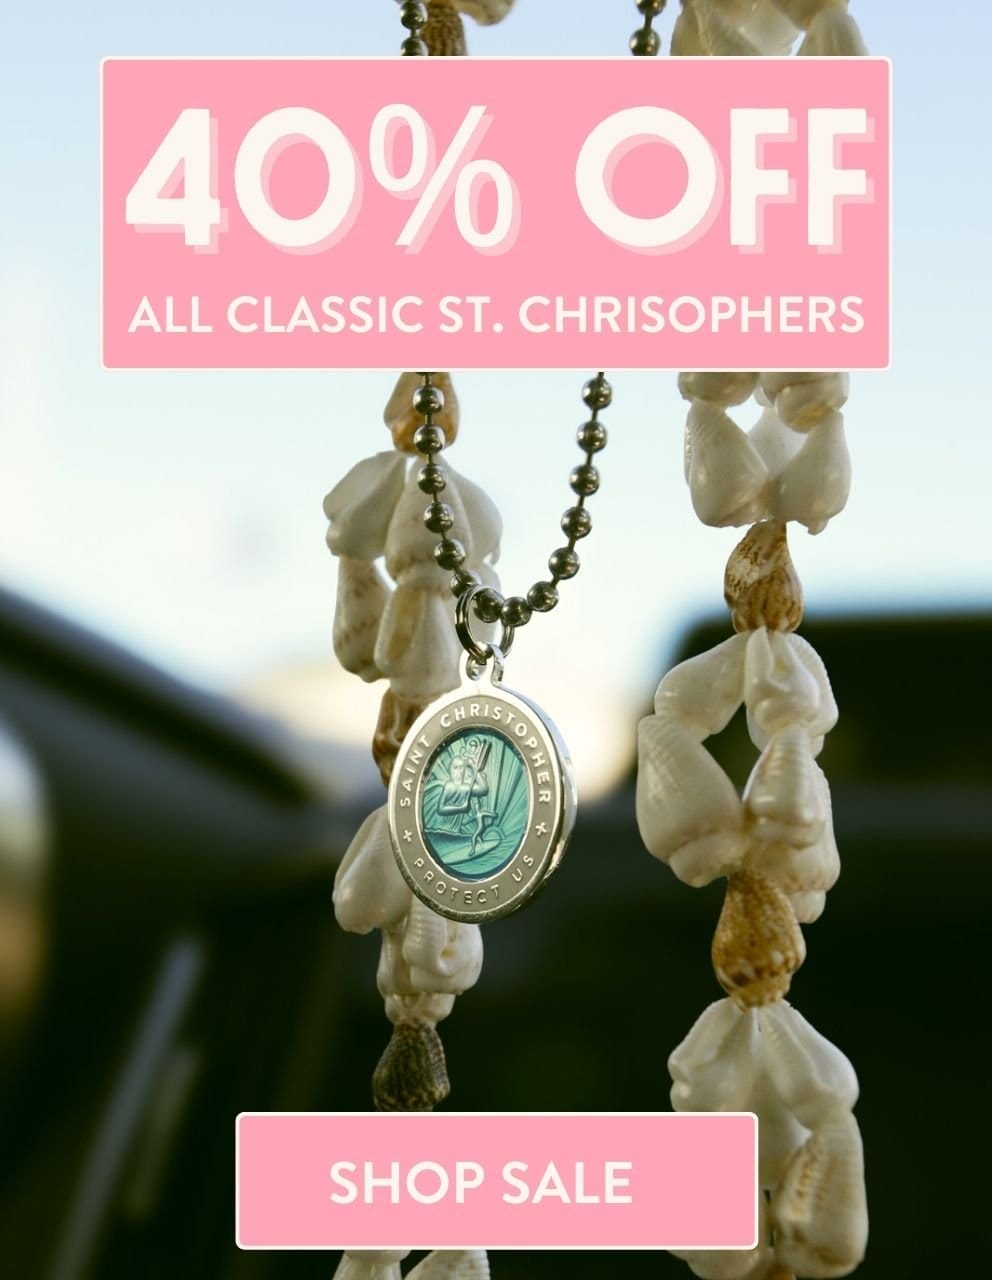 SHOP 40% OFF CLASSIC ST. CHRISTOPHERS